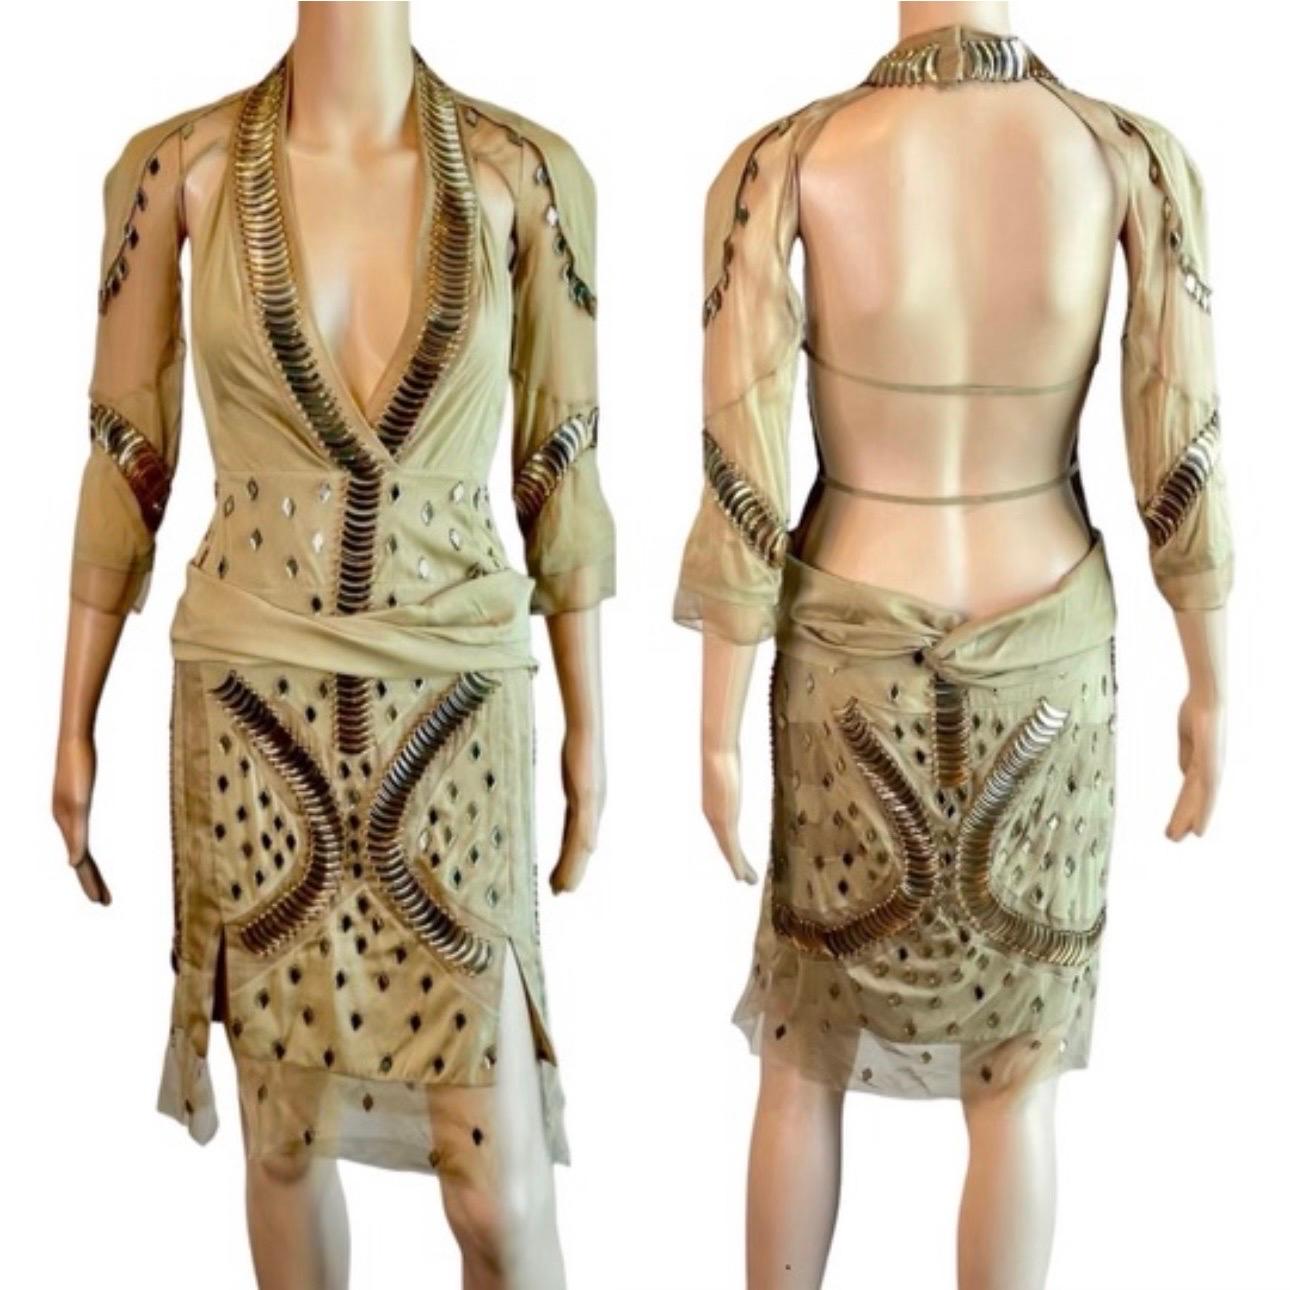 Gucci S/S 2005 Runway Embellished Sheer Plunging Neckline Cutout Back Mini Dress 1